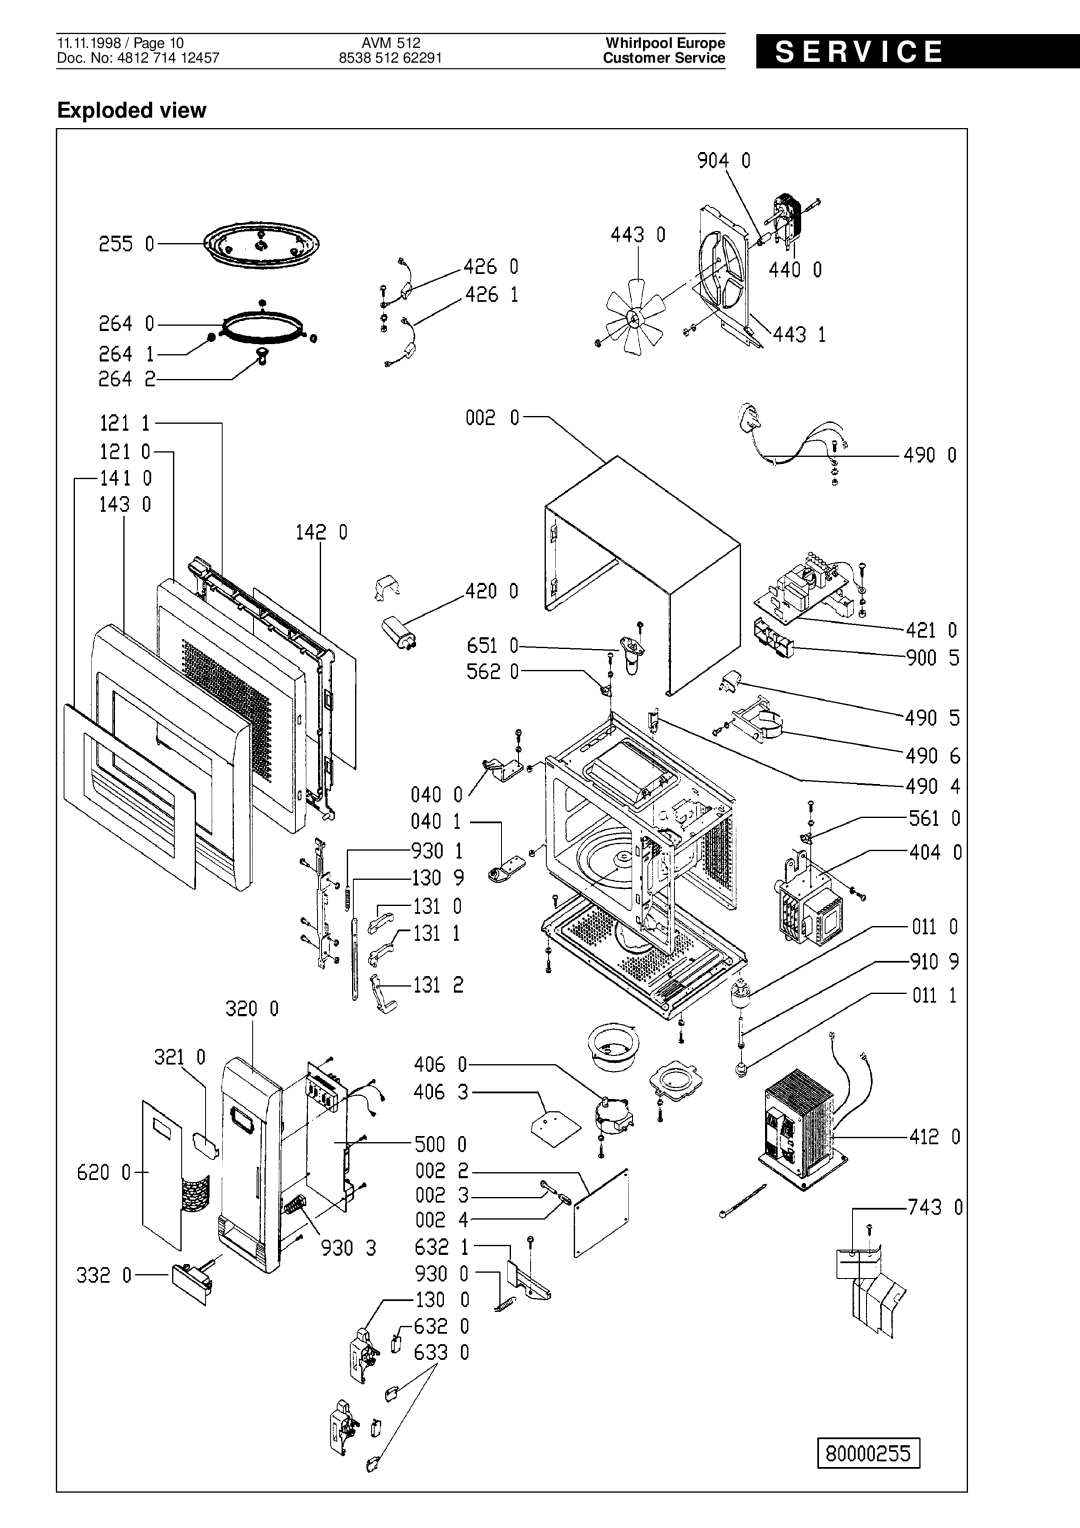 Whirlpool AVM 512 Exploded view, S E R V I C E, 11.11.1998 / Page, Doc. No 4812, 8538, Whirlpool Europe, Customer Service 